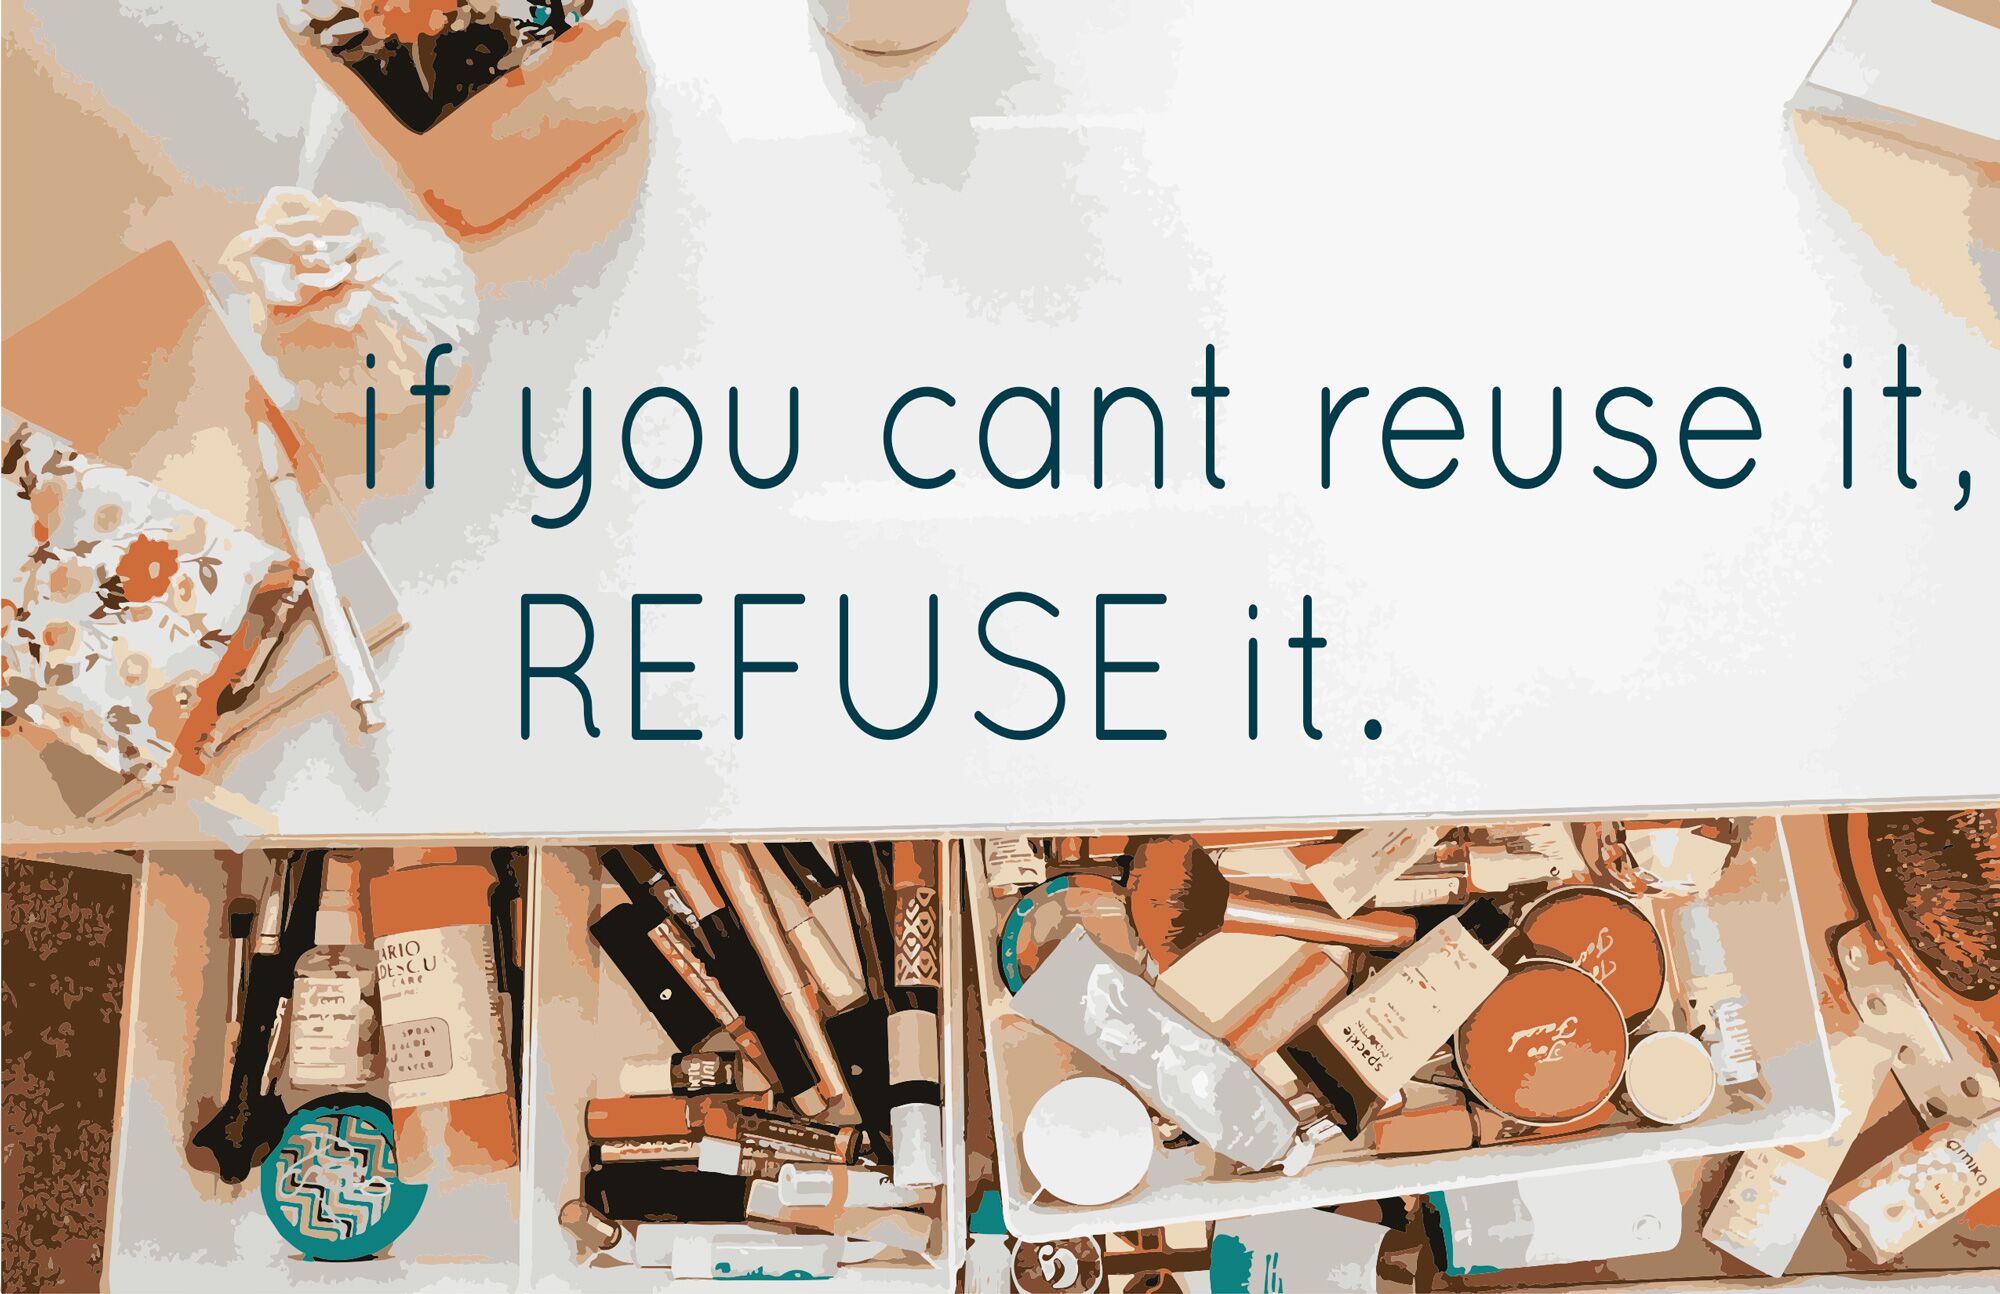 An image of a poster shows a photograph of an open makeup drawer and the headline "if you can't reuse it, refuse it."